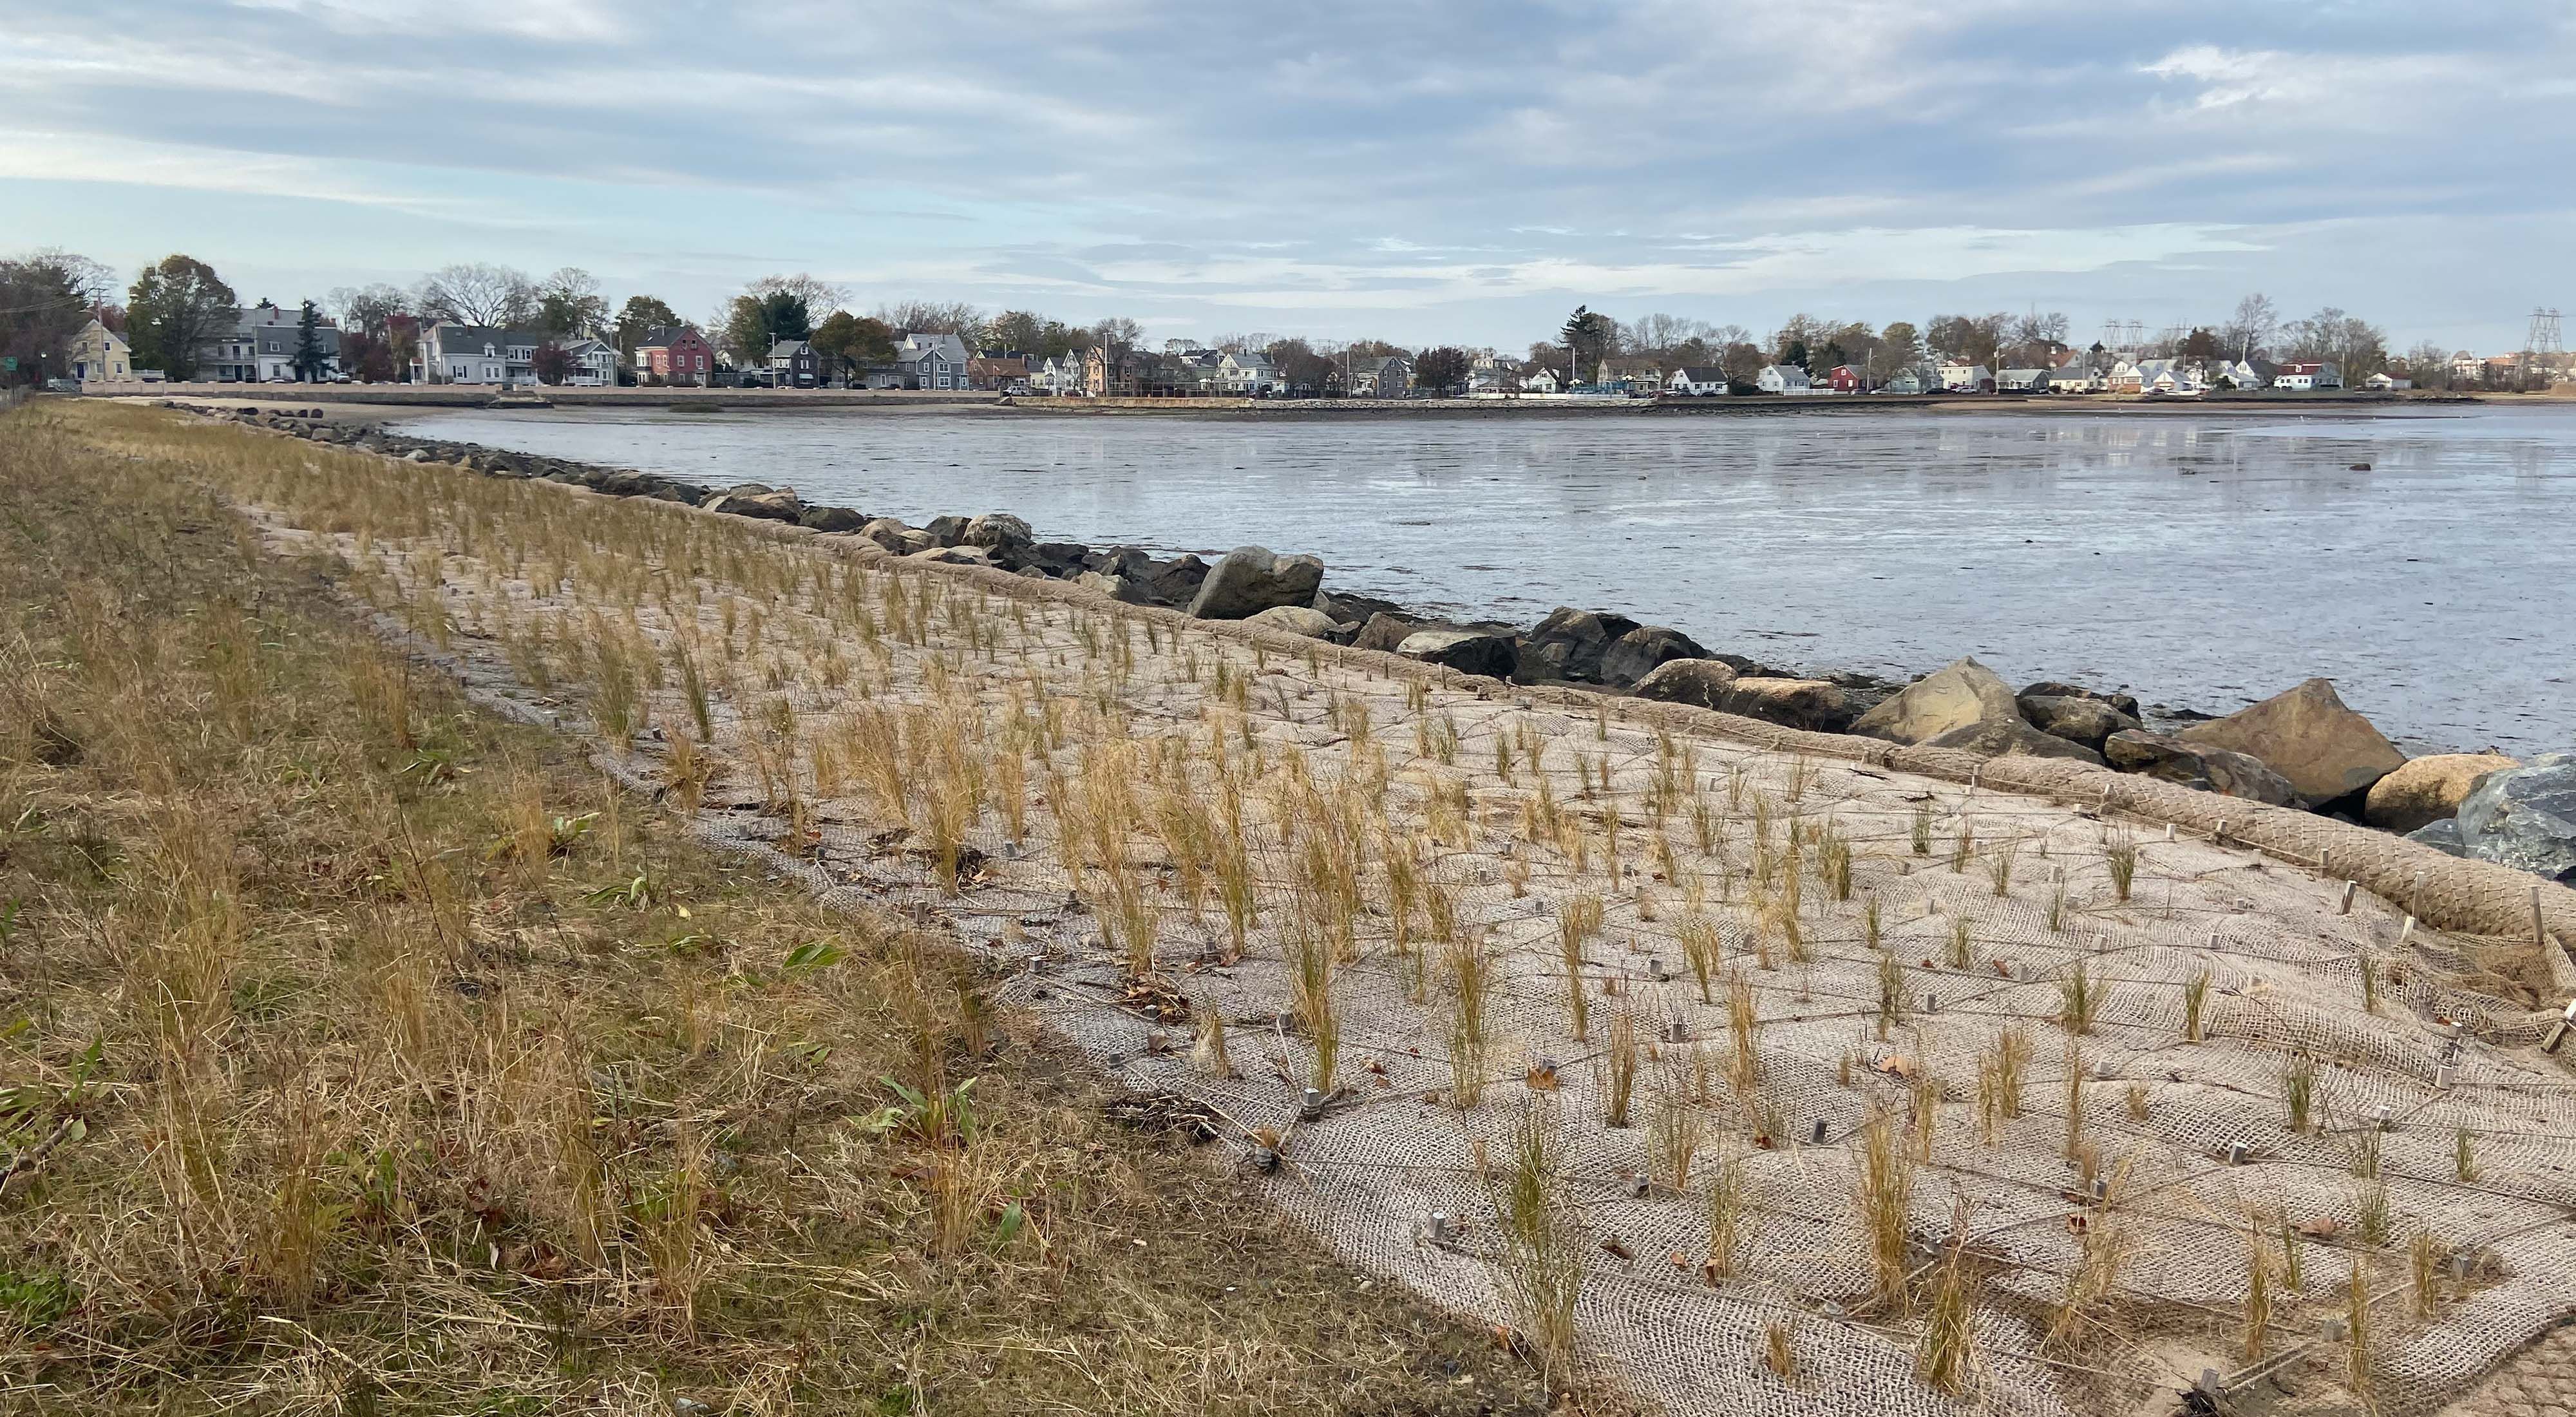 Shoreline along a bay in Salem, Massachusetts, with newly planted marsh grass in the foreground.